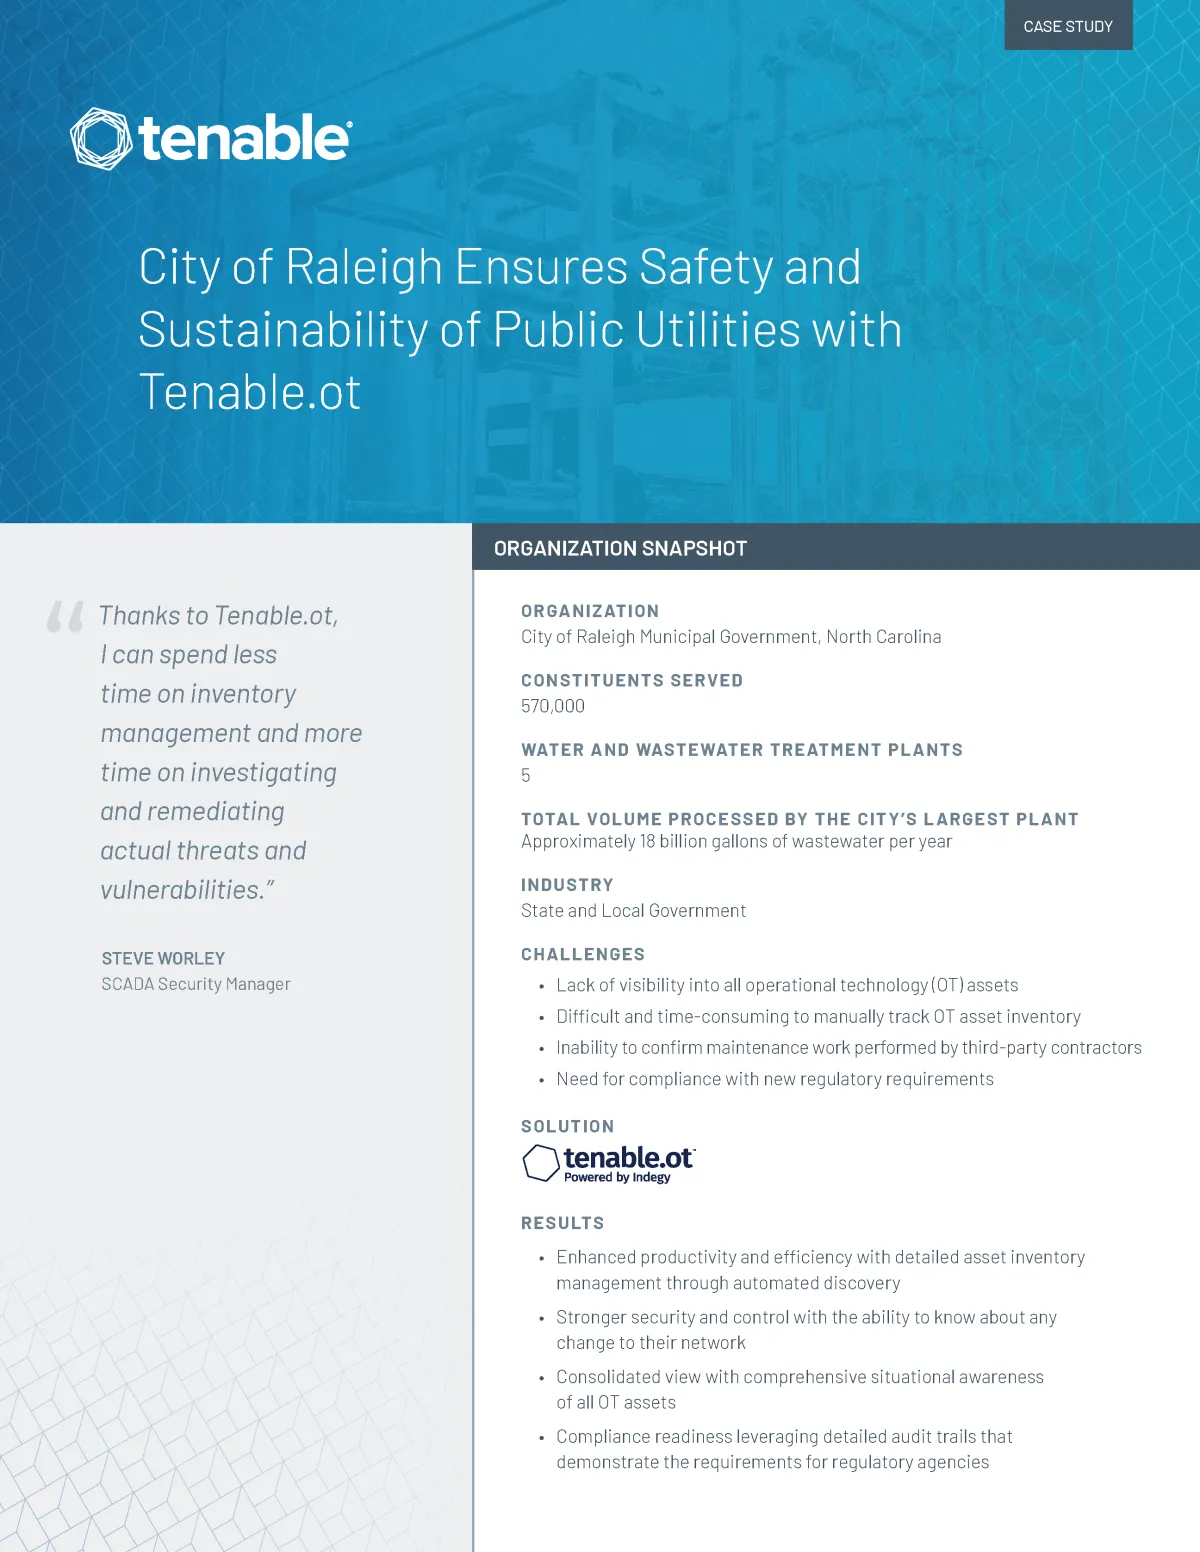 Case Study: City of Raleigh Ensures Safety and Sustainability of Public Utilities with Tenable.ot